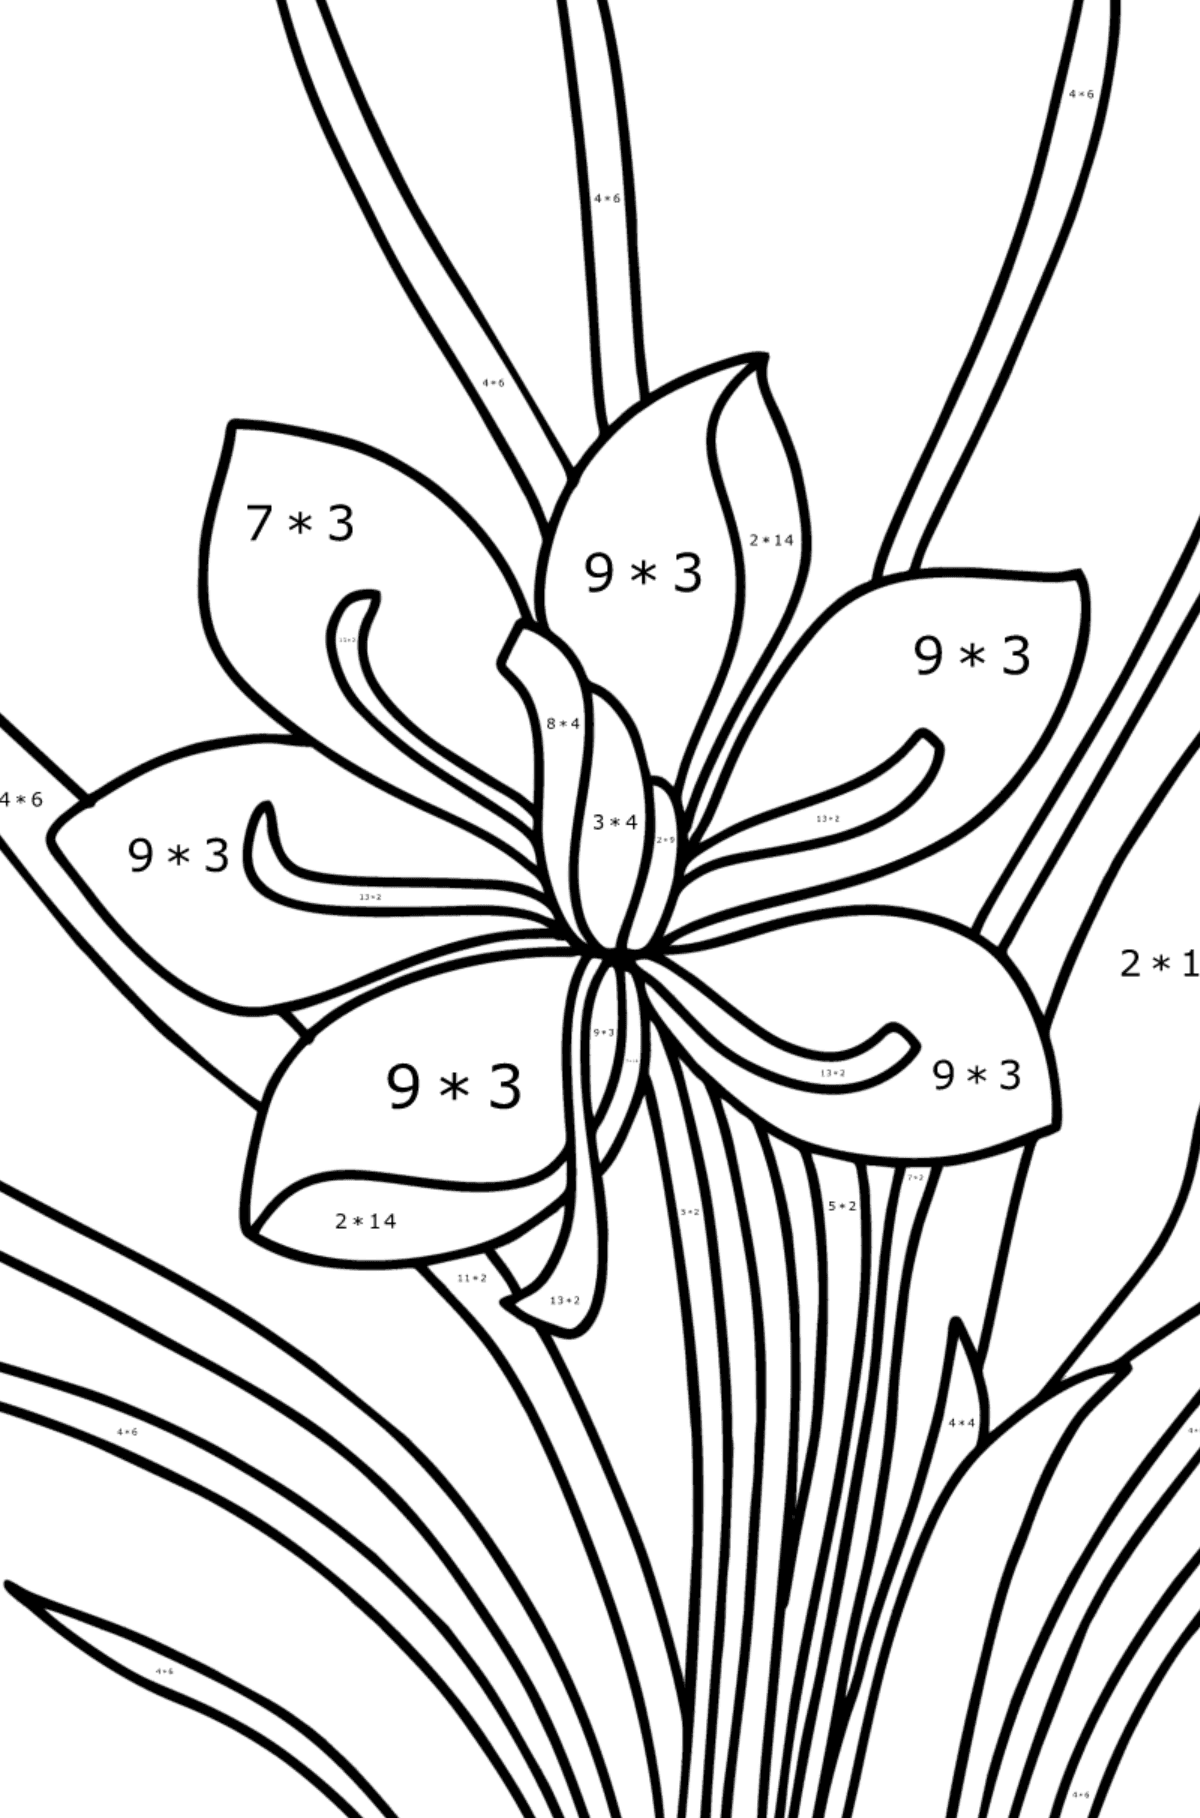 Crocus coloring page - Math Coloring - Multiplication for Kids